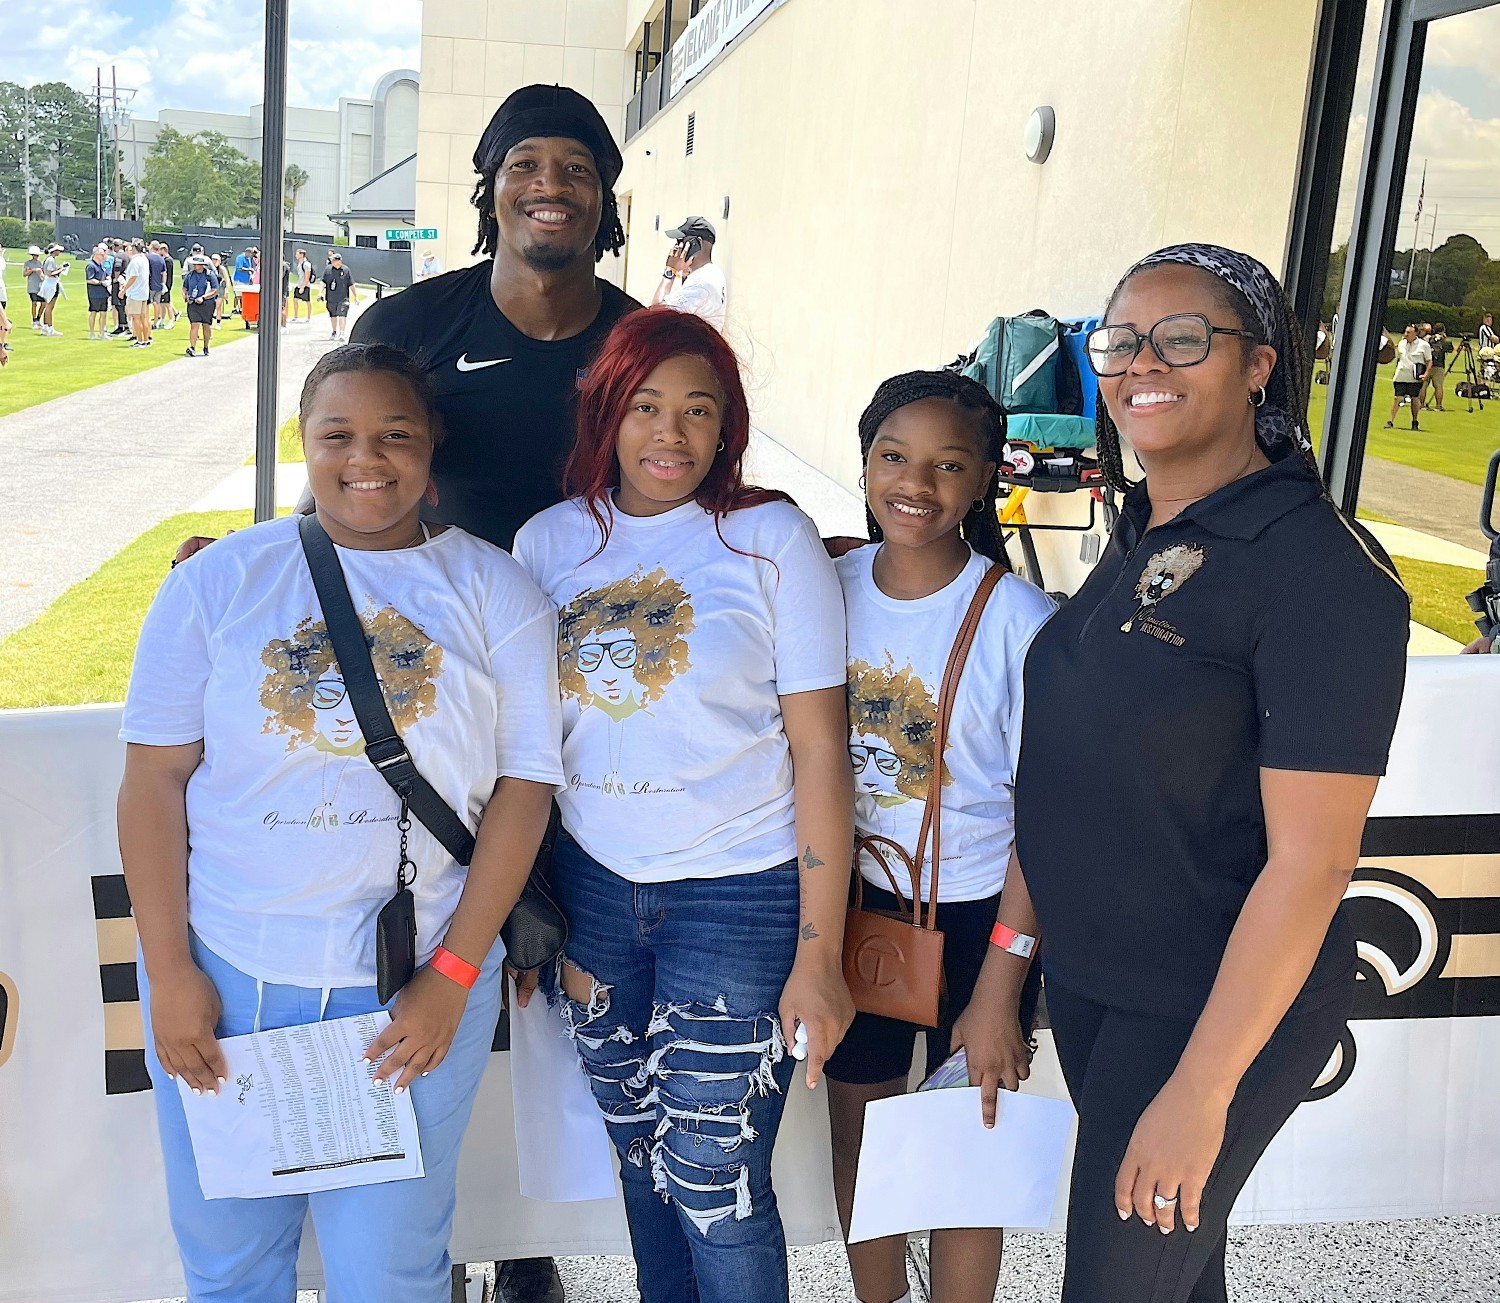 Our Operation Girls participants and our CEO Syrita  Steib pose with New Orleans Saints player Jameis Winston 